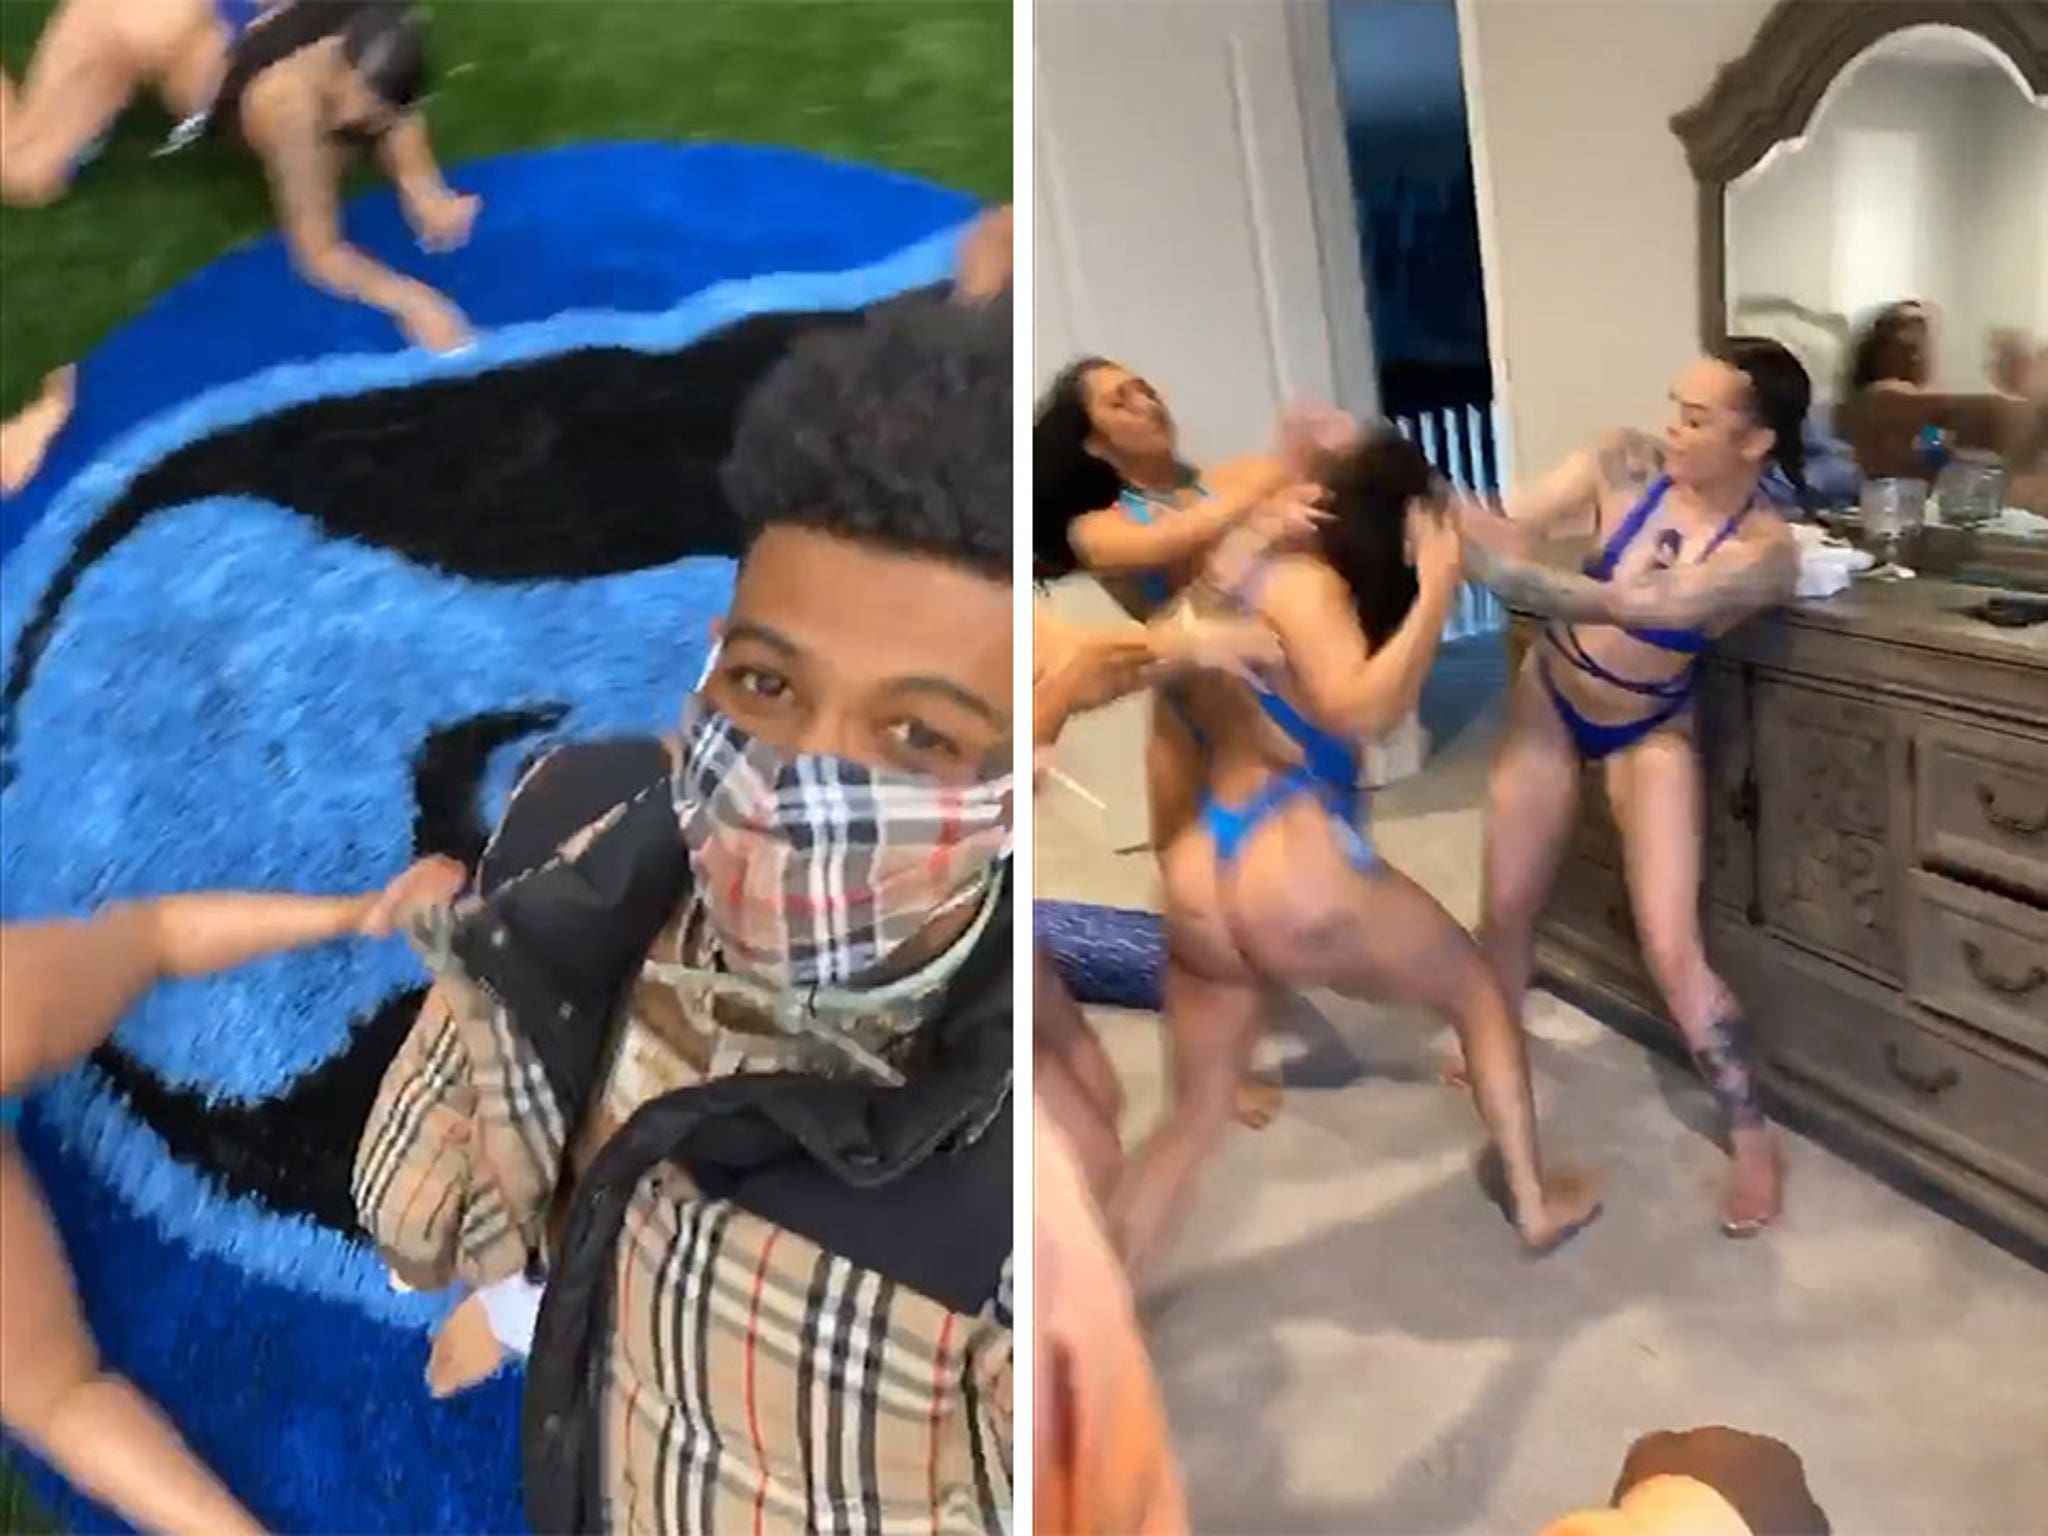 Blueface's Manager, Wack 100, Reacts to Stripper Video-Turned-Fight